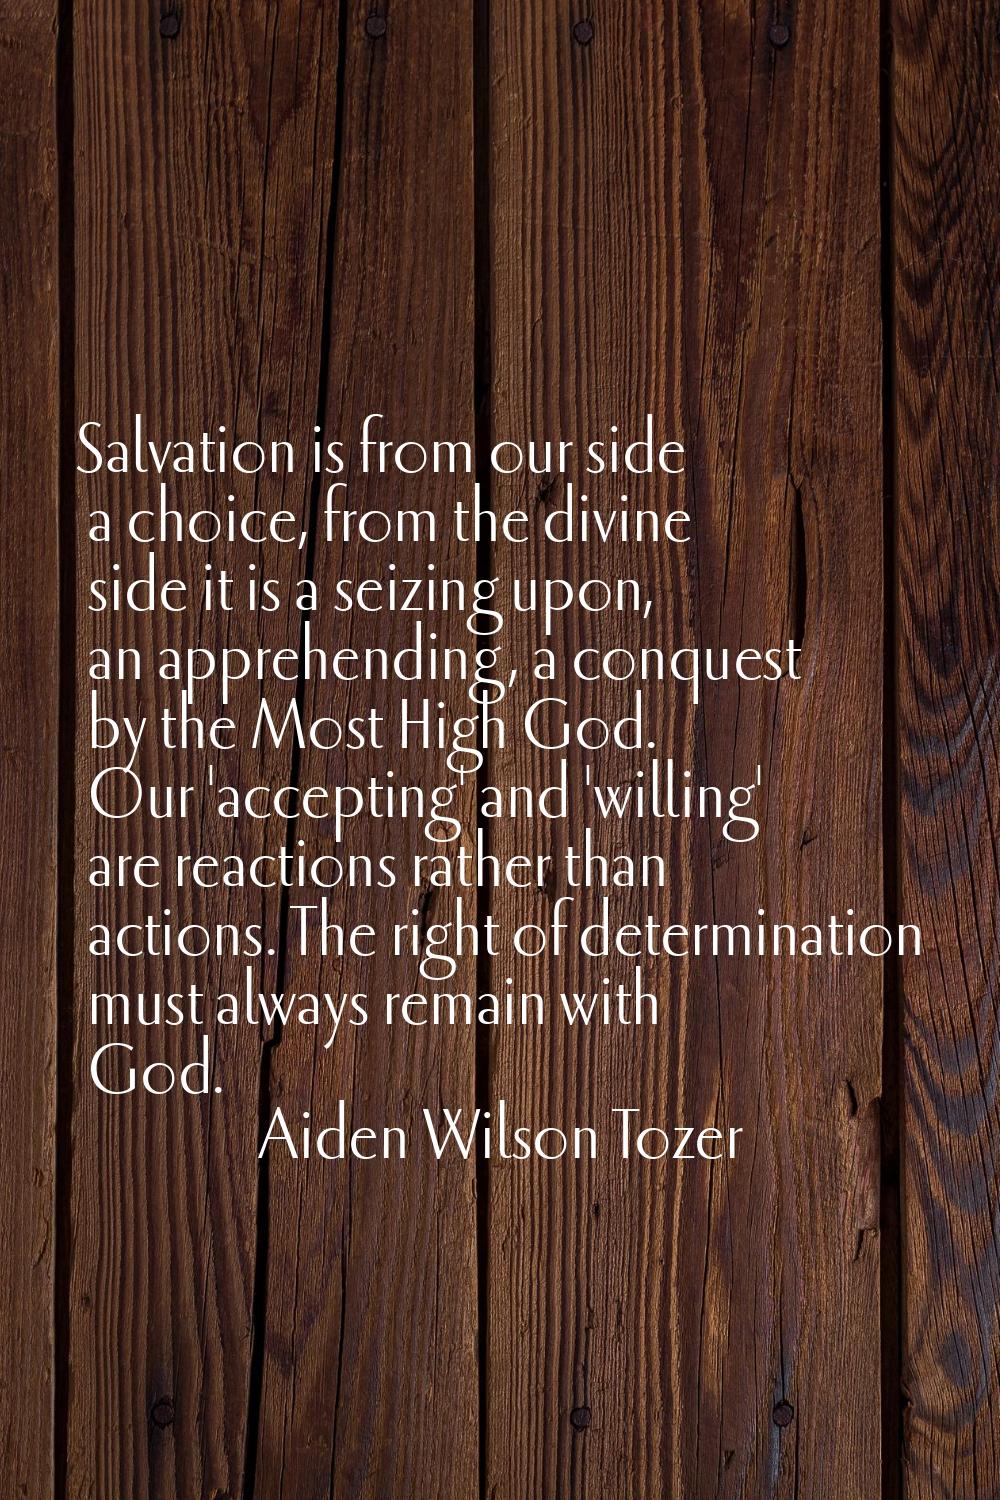 Salvation is from our side a choice, from the divine side it is a seizing upon, an apprehending, a 